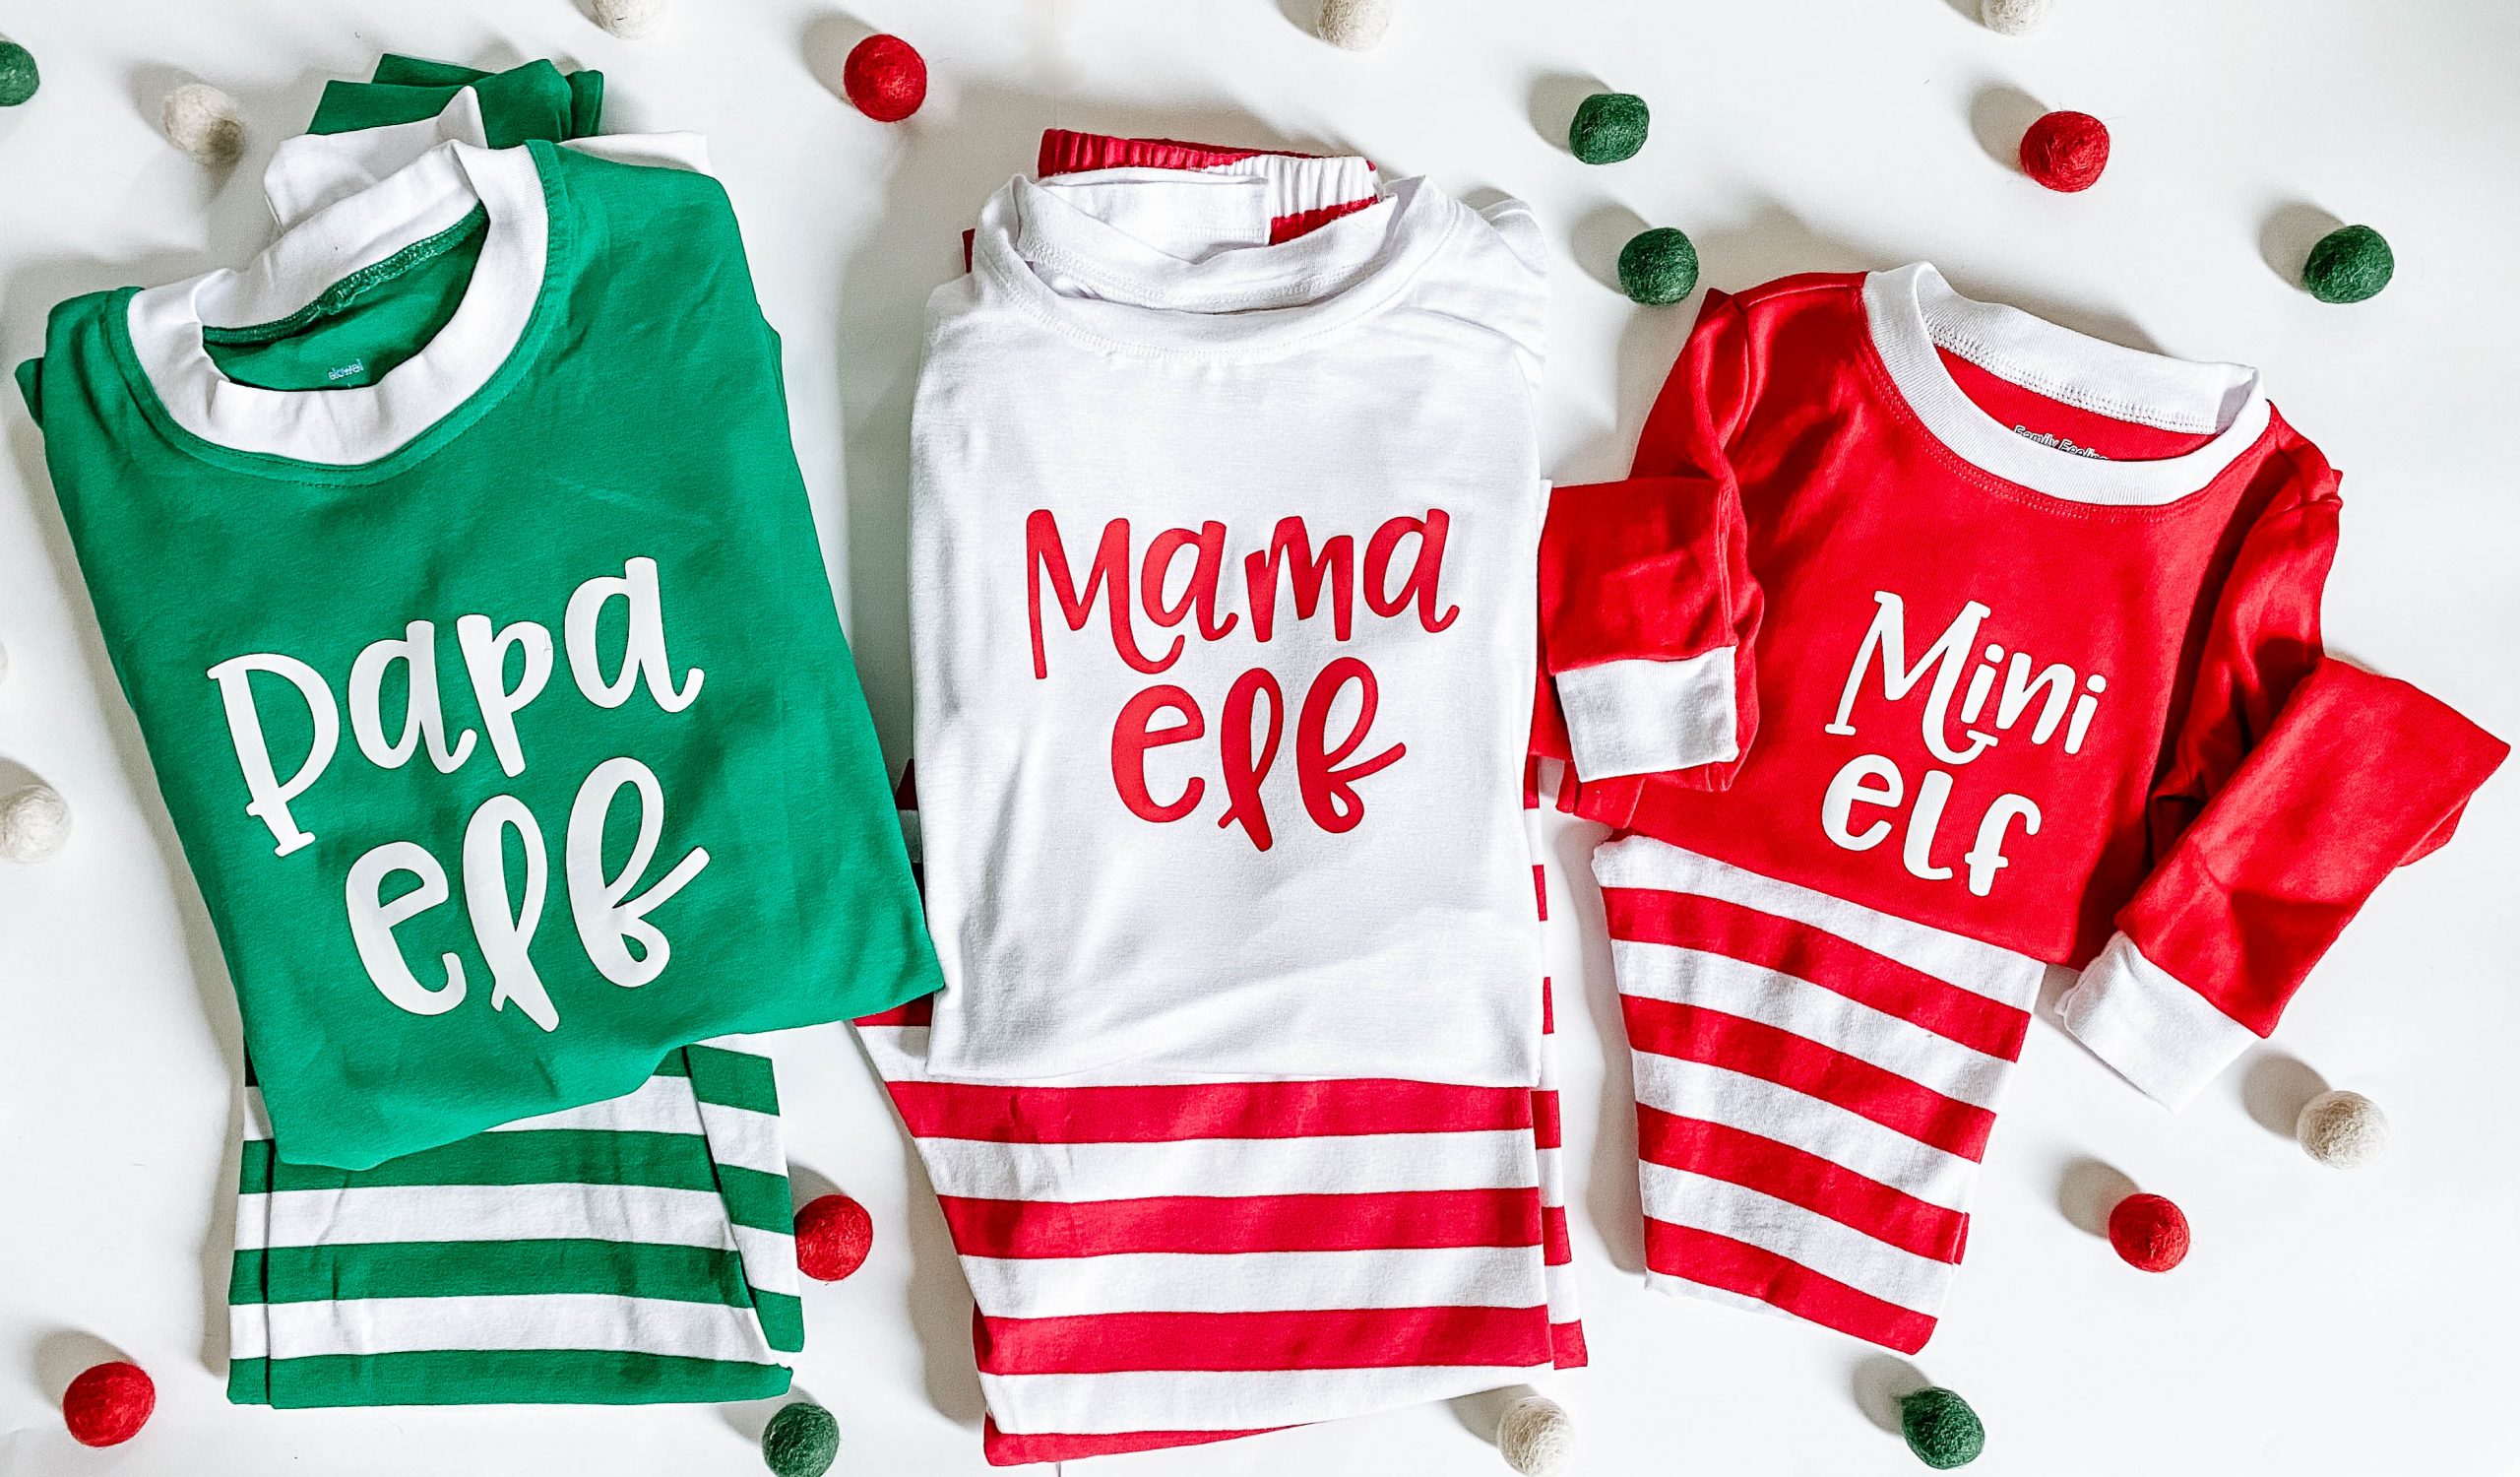 How-To Make Your Own Set Of Matching Family Christmas Pajamas With Heat Transfer Vinyl